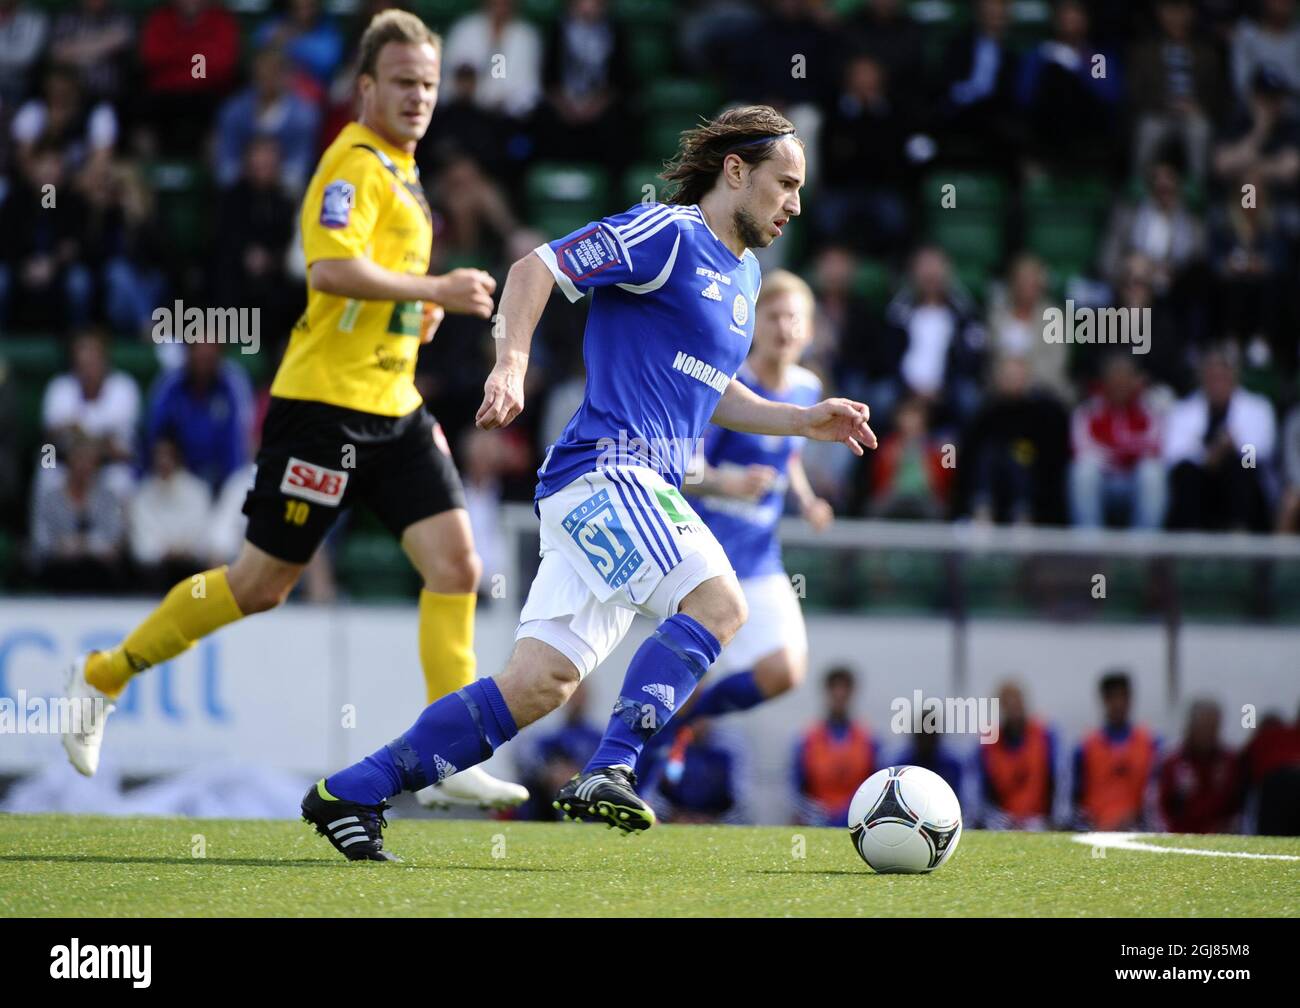 SUNDSVALL 20120721: Sundsvall's Kevin Walker controls the ball in front of Mjallby AIF's Marcus Ekenberg, left, in the allsvenska match between GIF Sundsvall and Mjallby AIF on July 21, 2012. Foto: Robin Nordlund / SCANPIX / Kod: 10850  Stock Photo